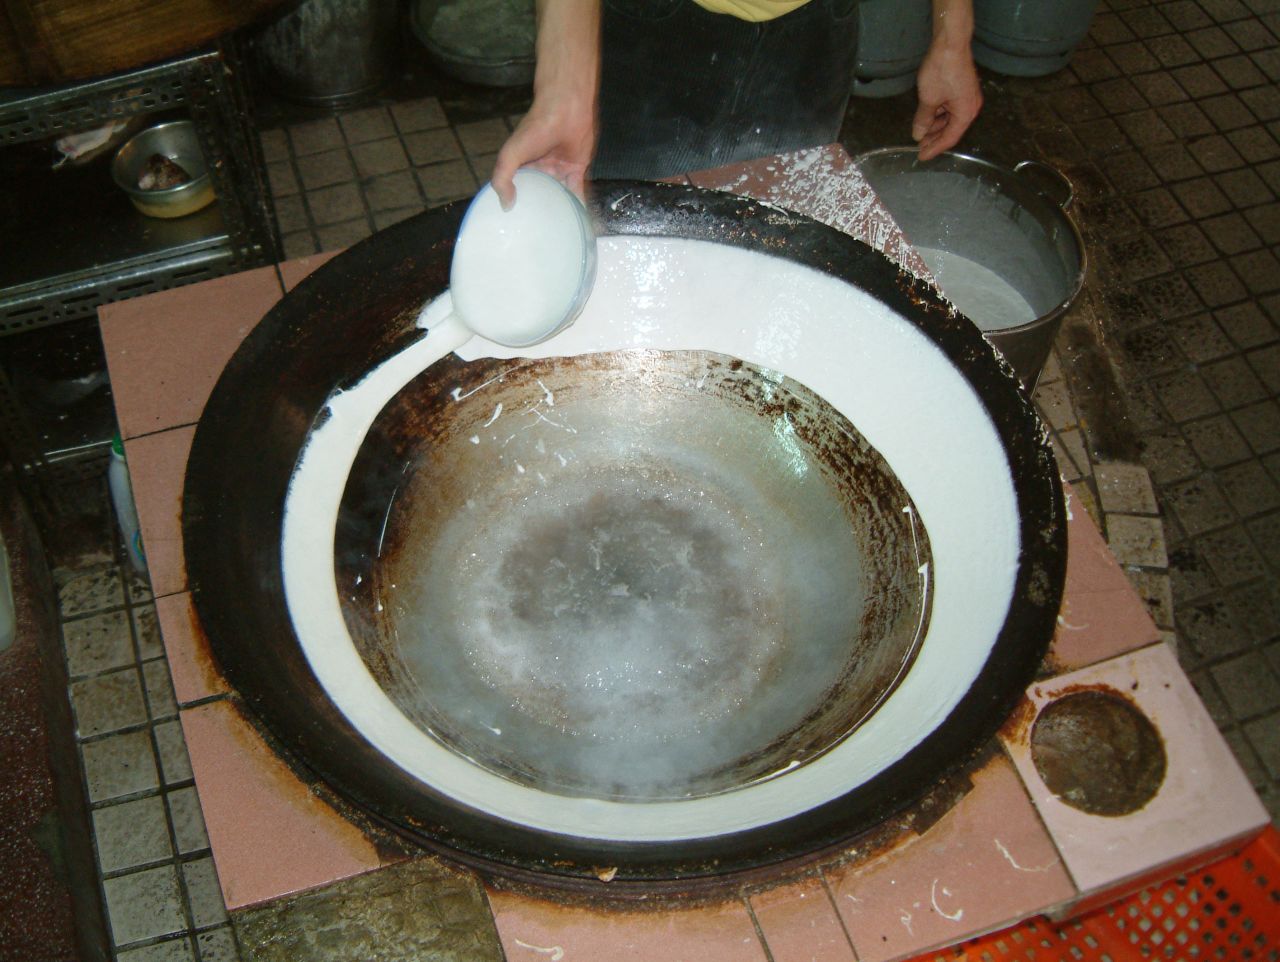 Painting the wok with rice slurry to make ding bian cuo.